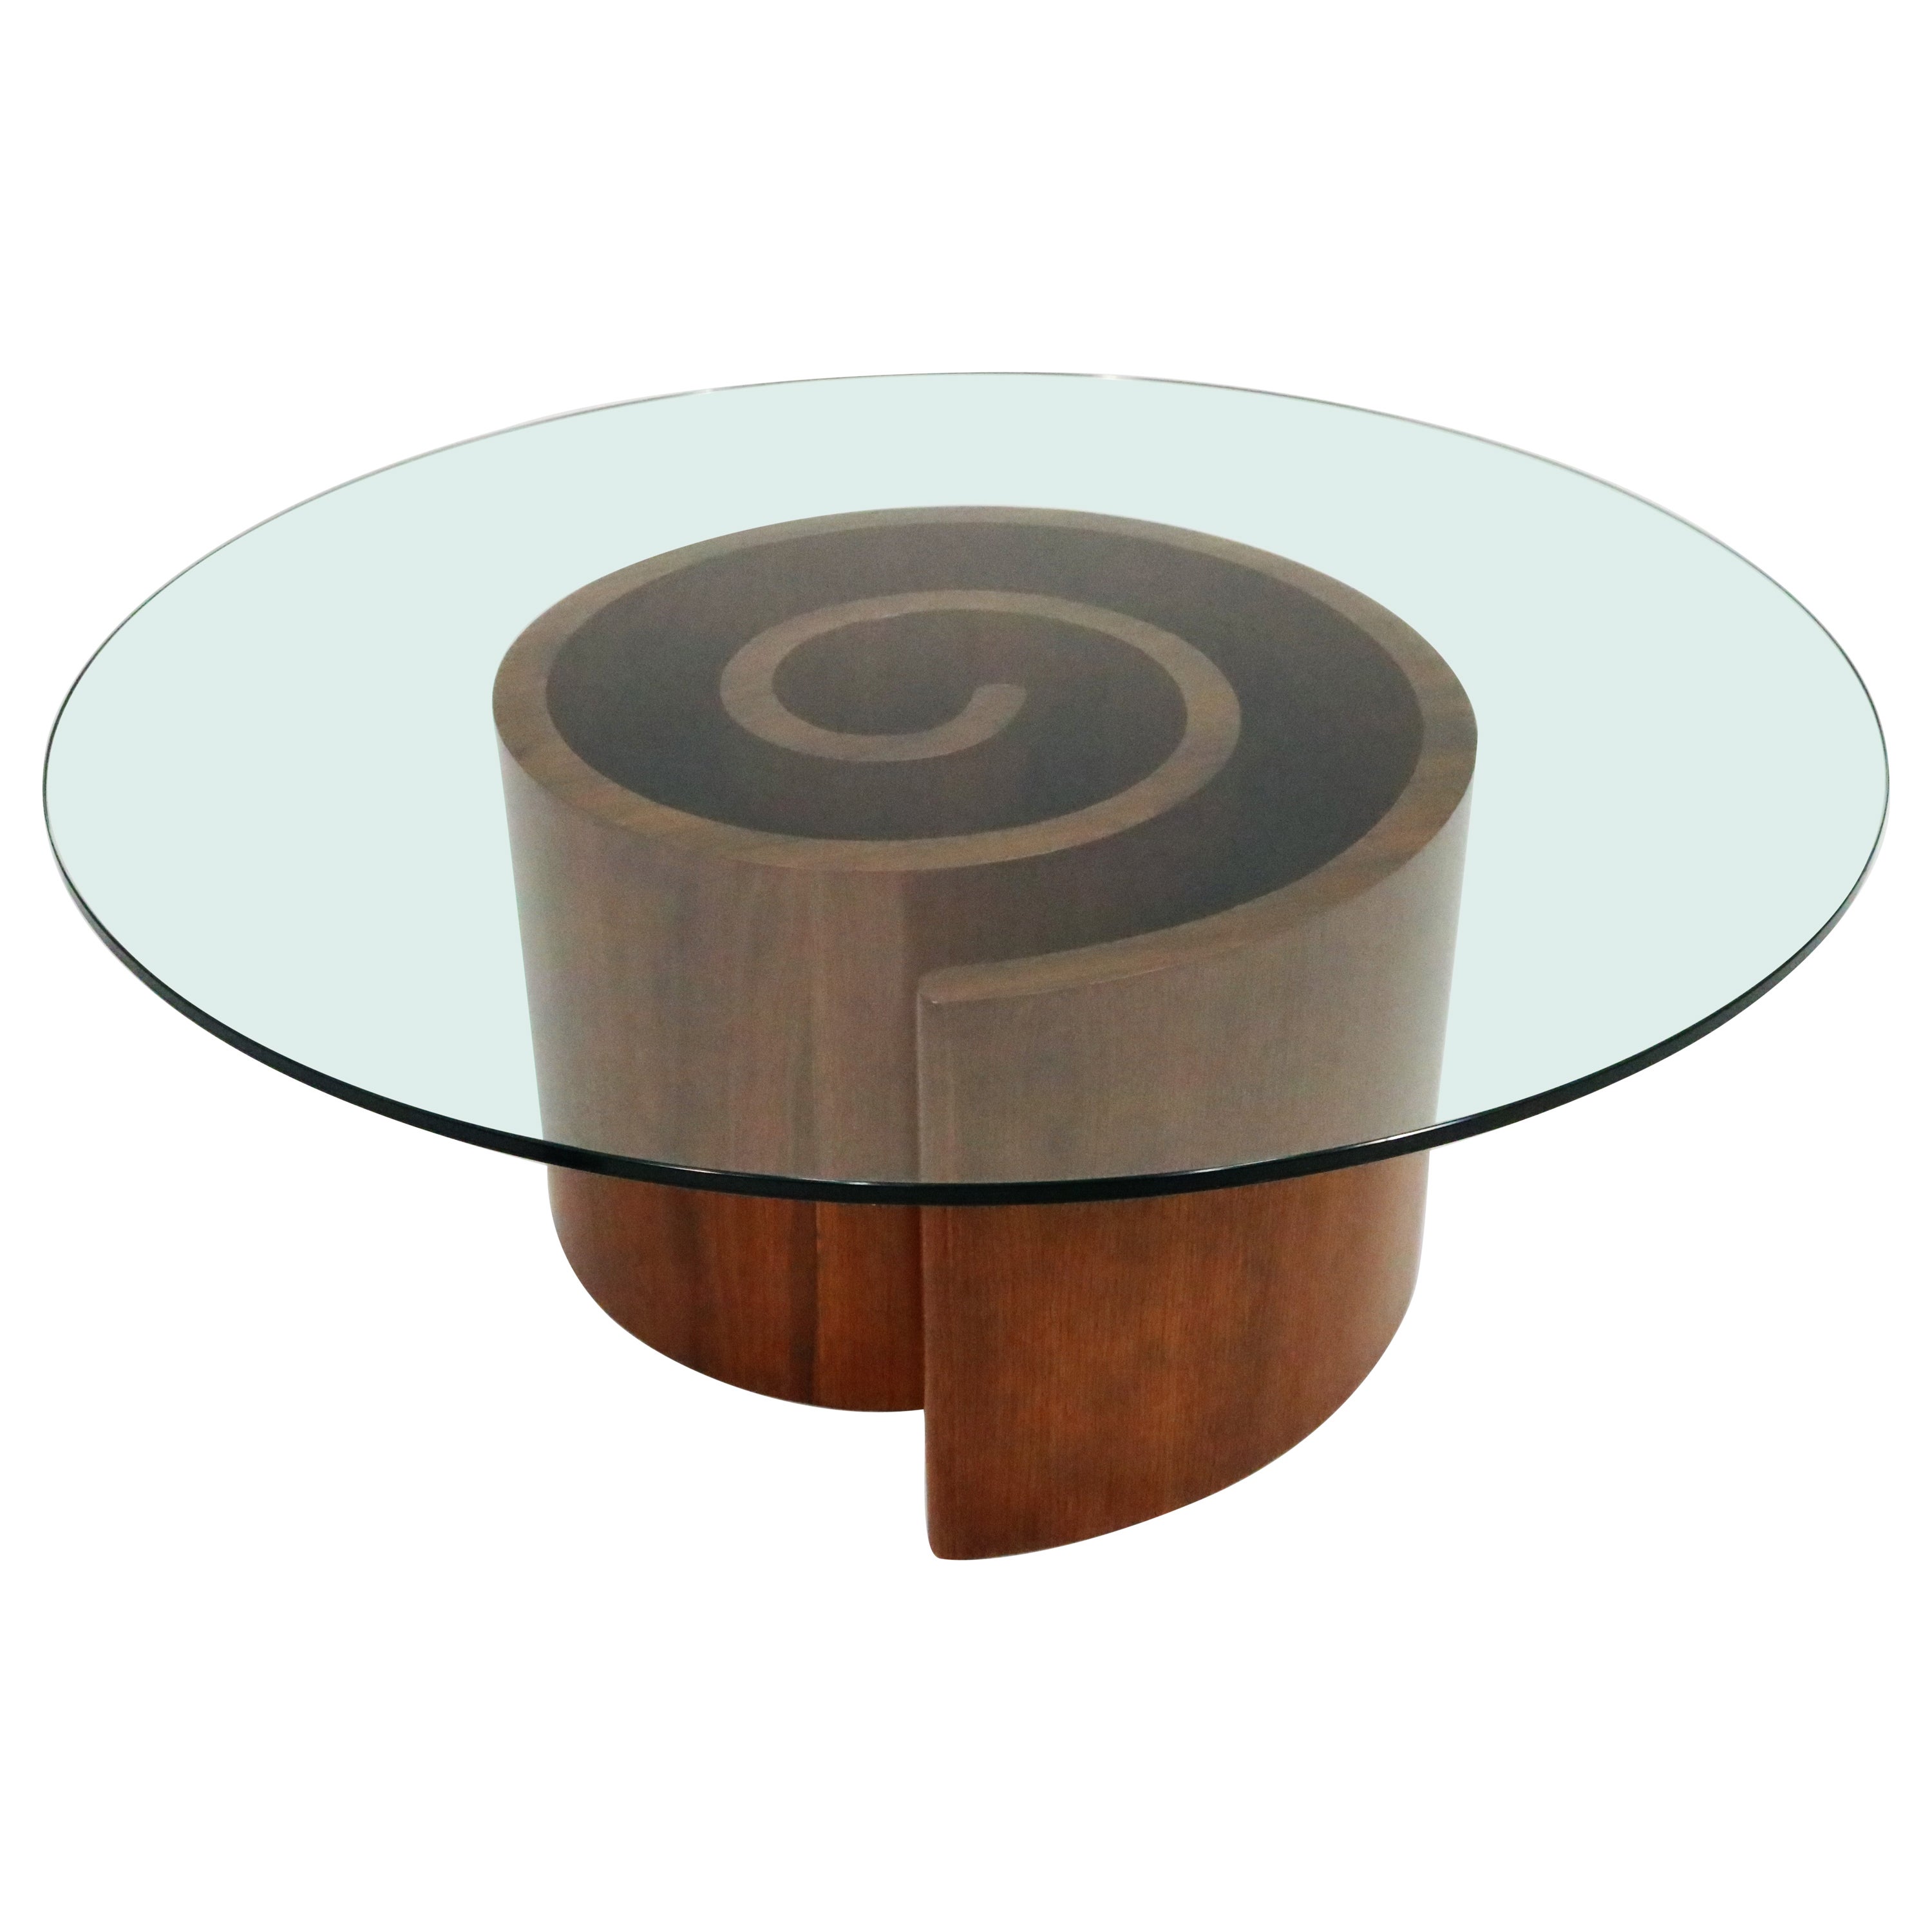 Vladimir Kagan Snail Coffee Table in Walnut with Round Glass Top